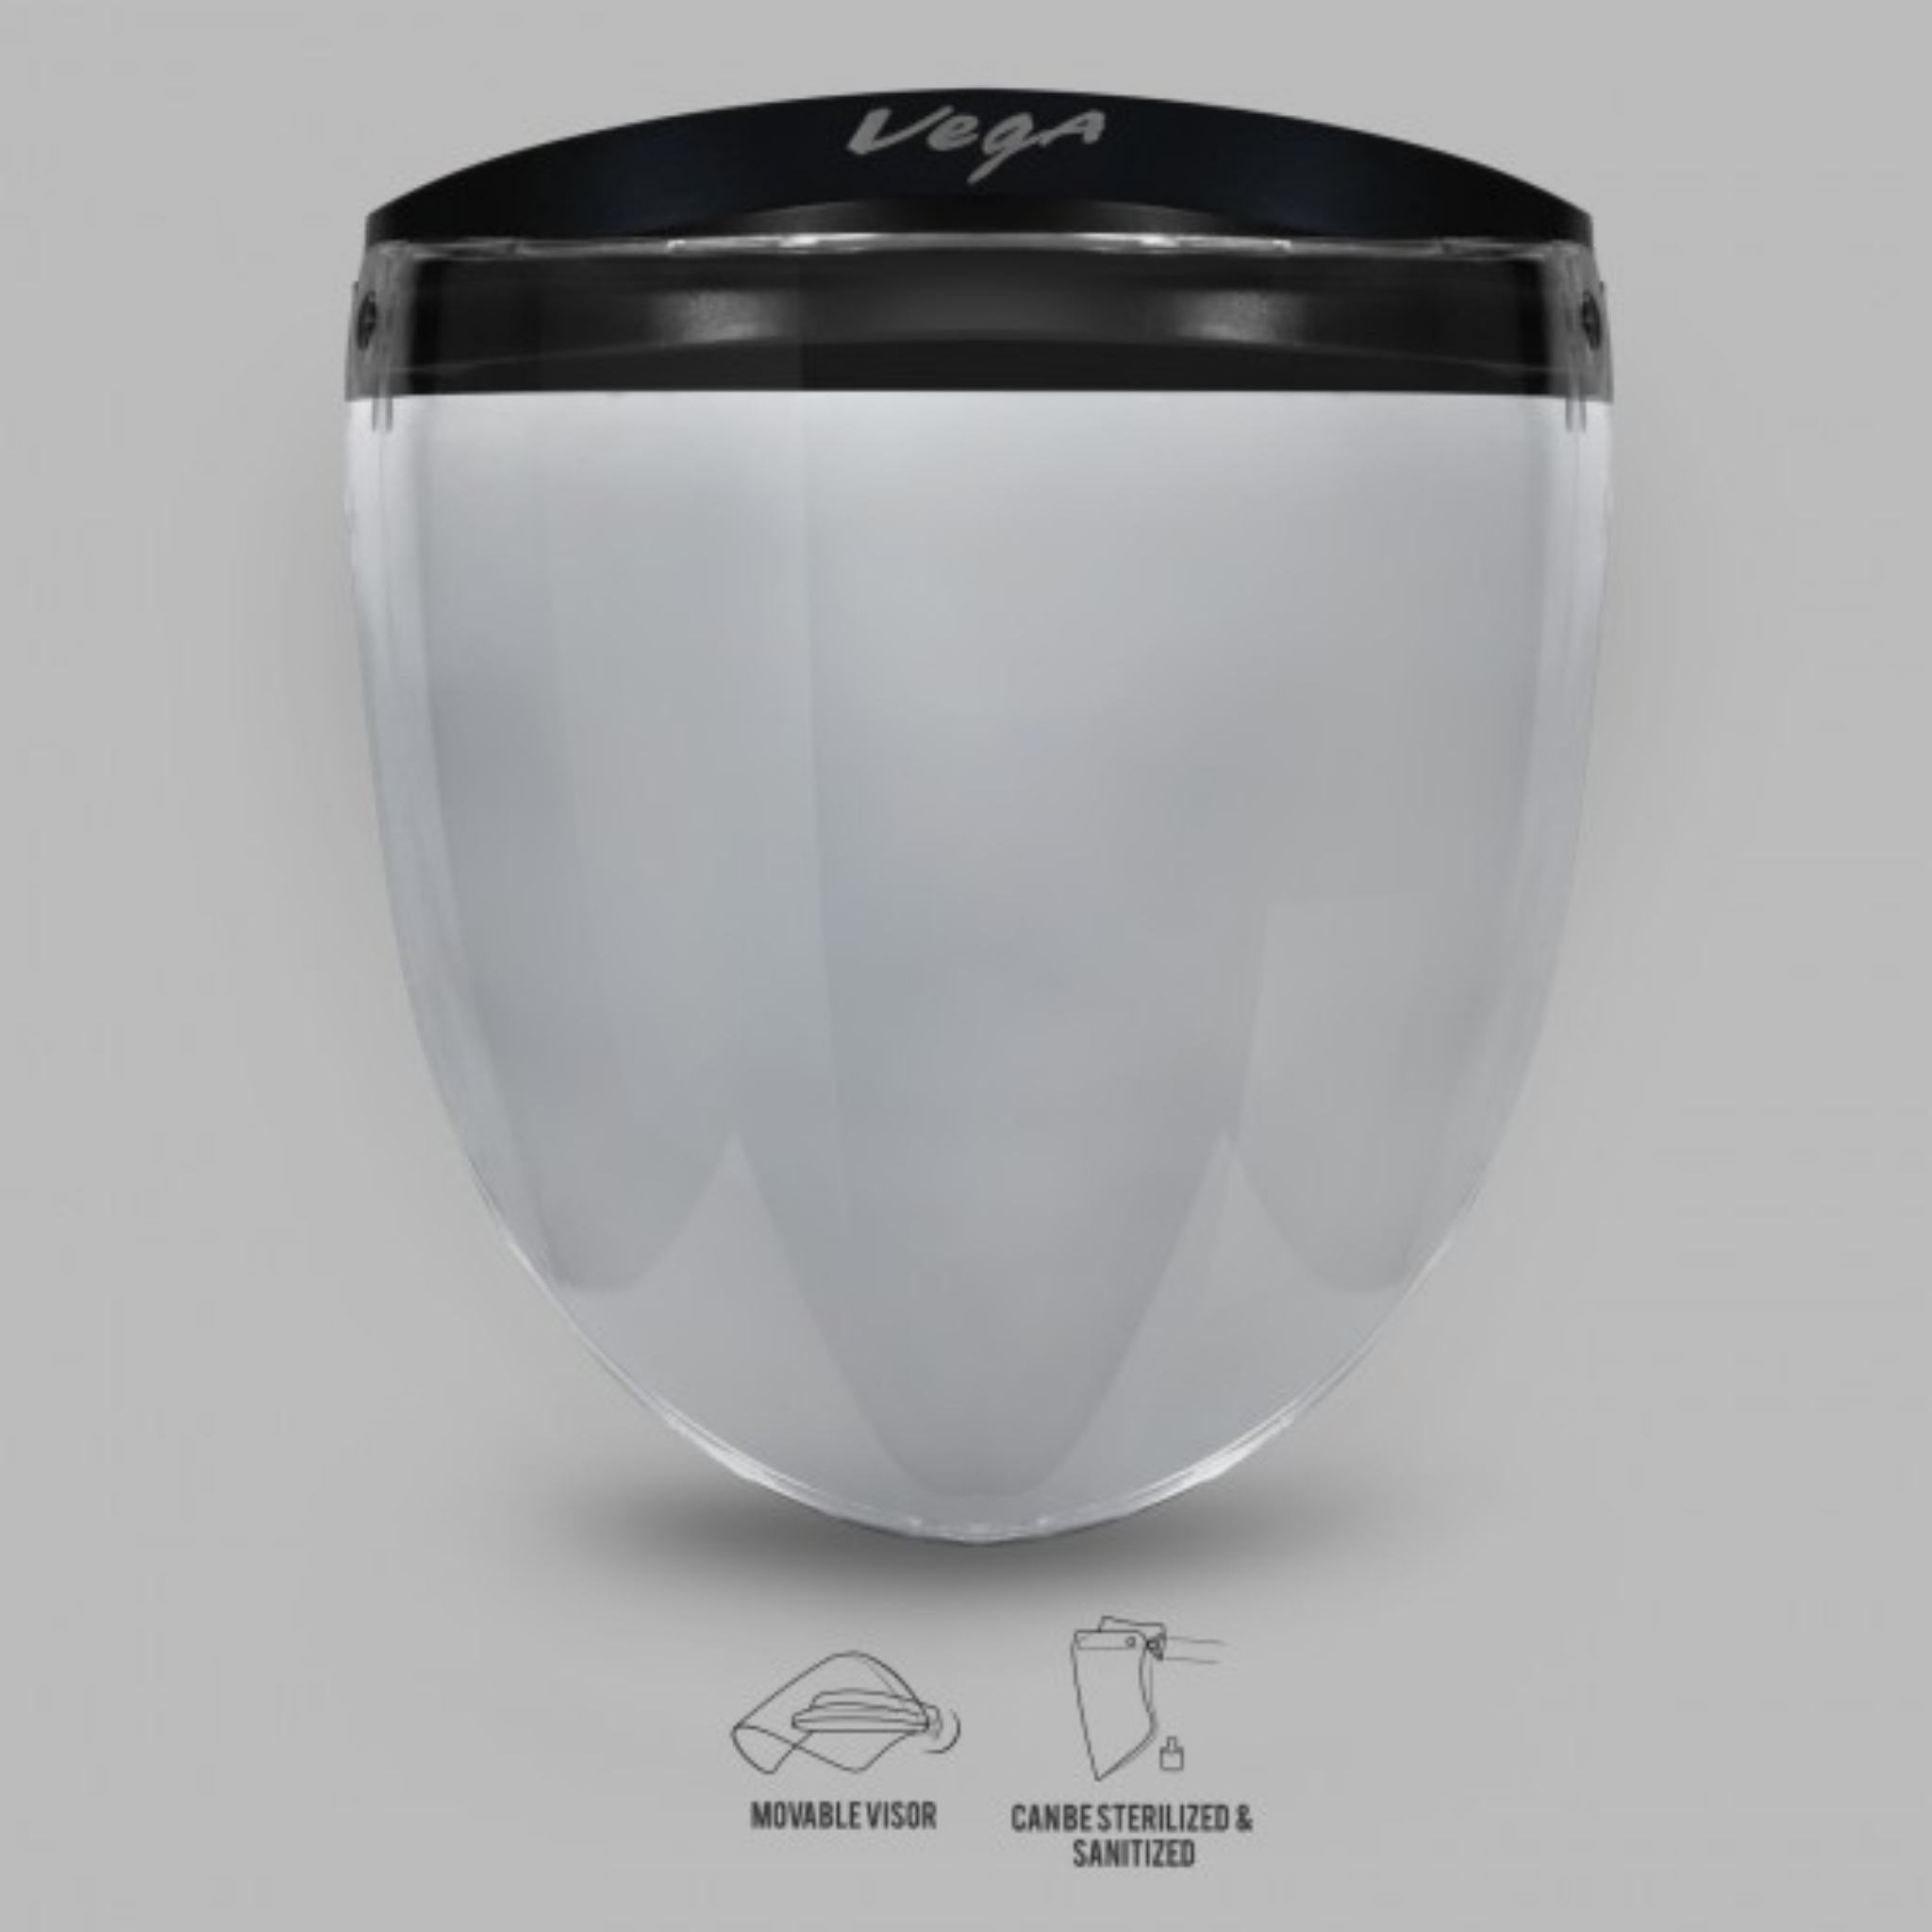 vega face protector shield in chennai comes with movable visor. It can be used as Resusable Face Shield